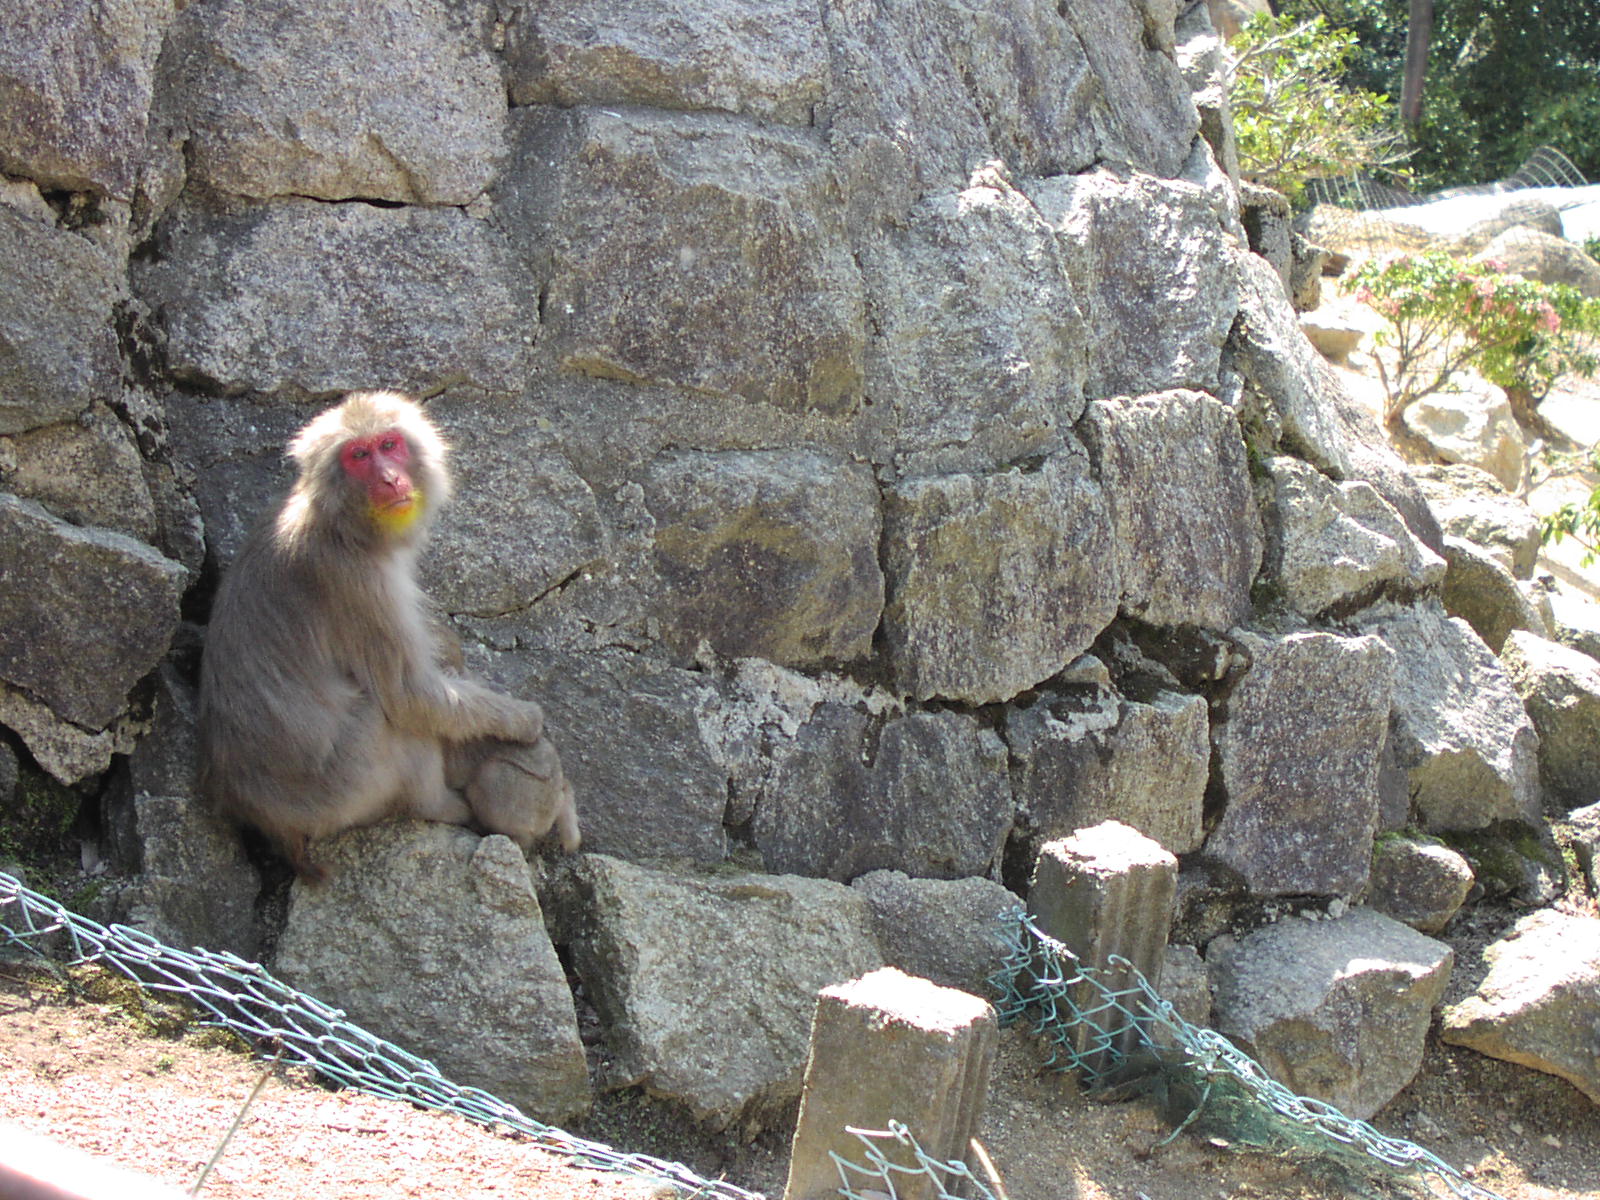 a monkey on rocks sticking his tongue out